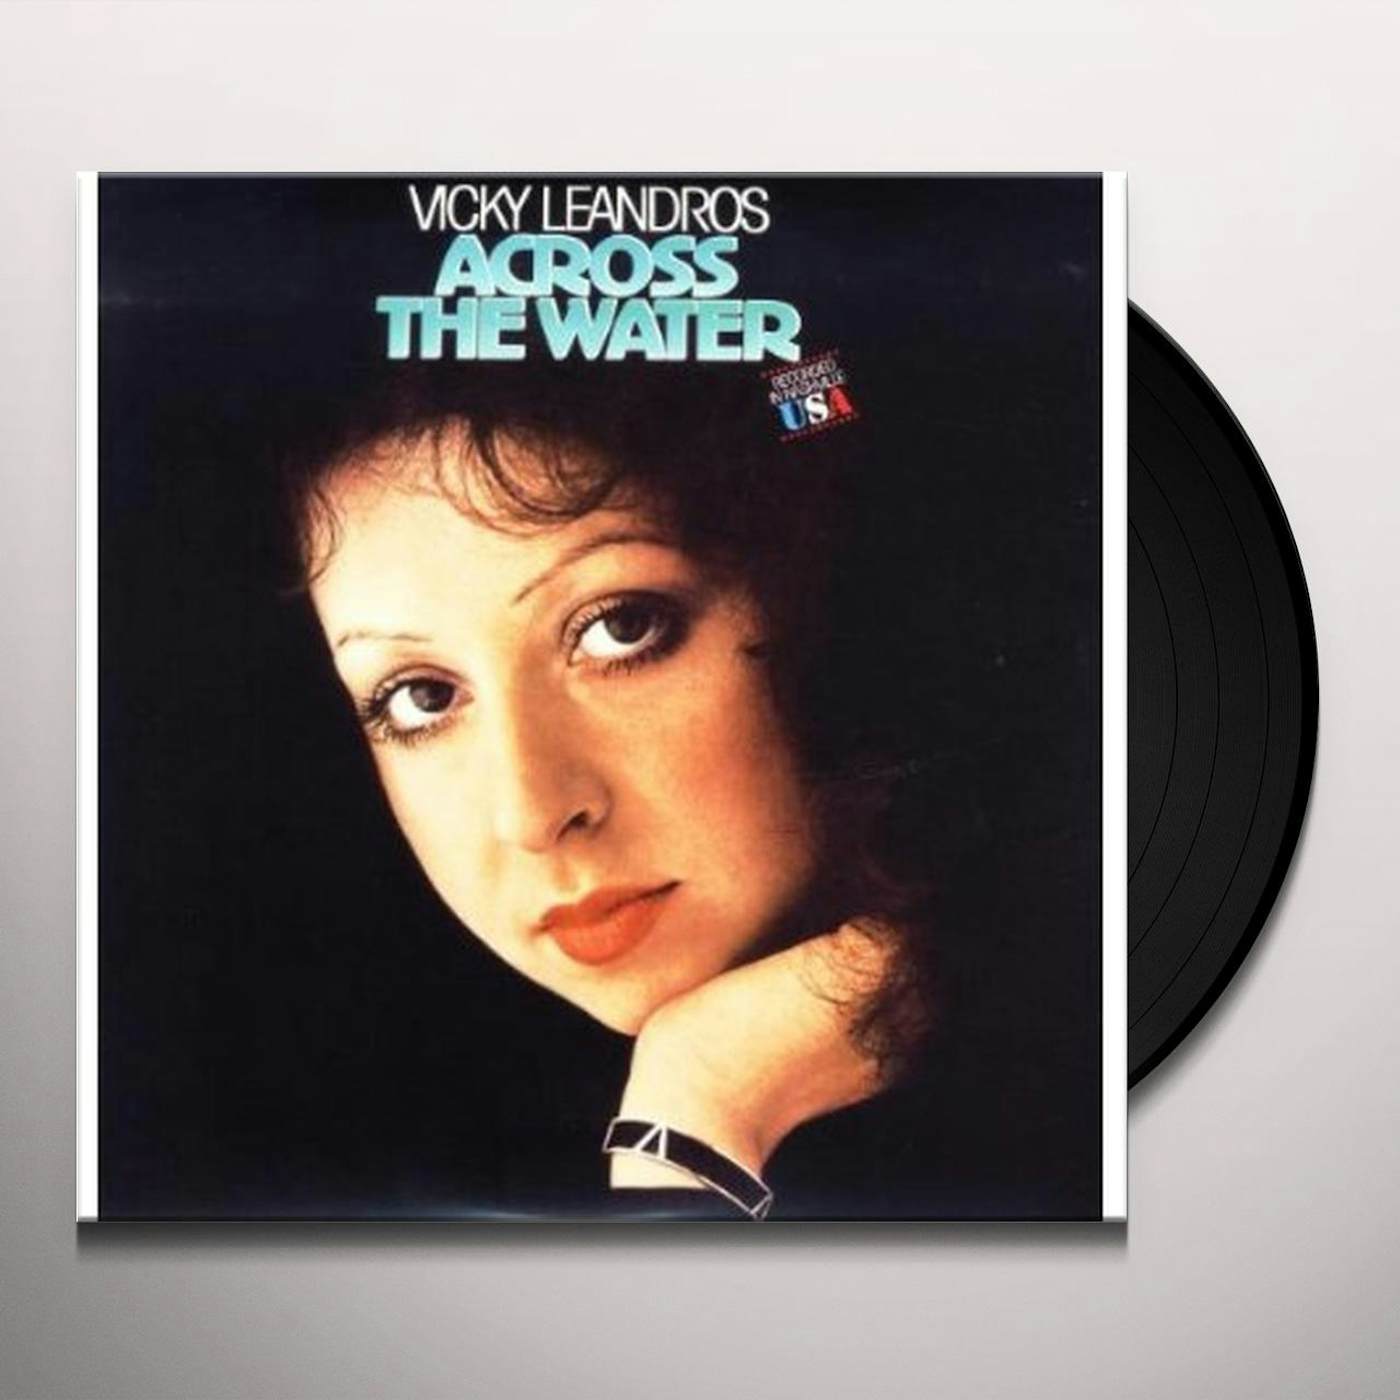 Vicky Leandros Across the Water Vinyl Record